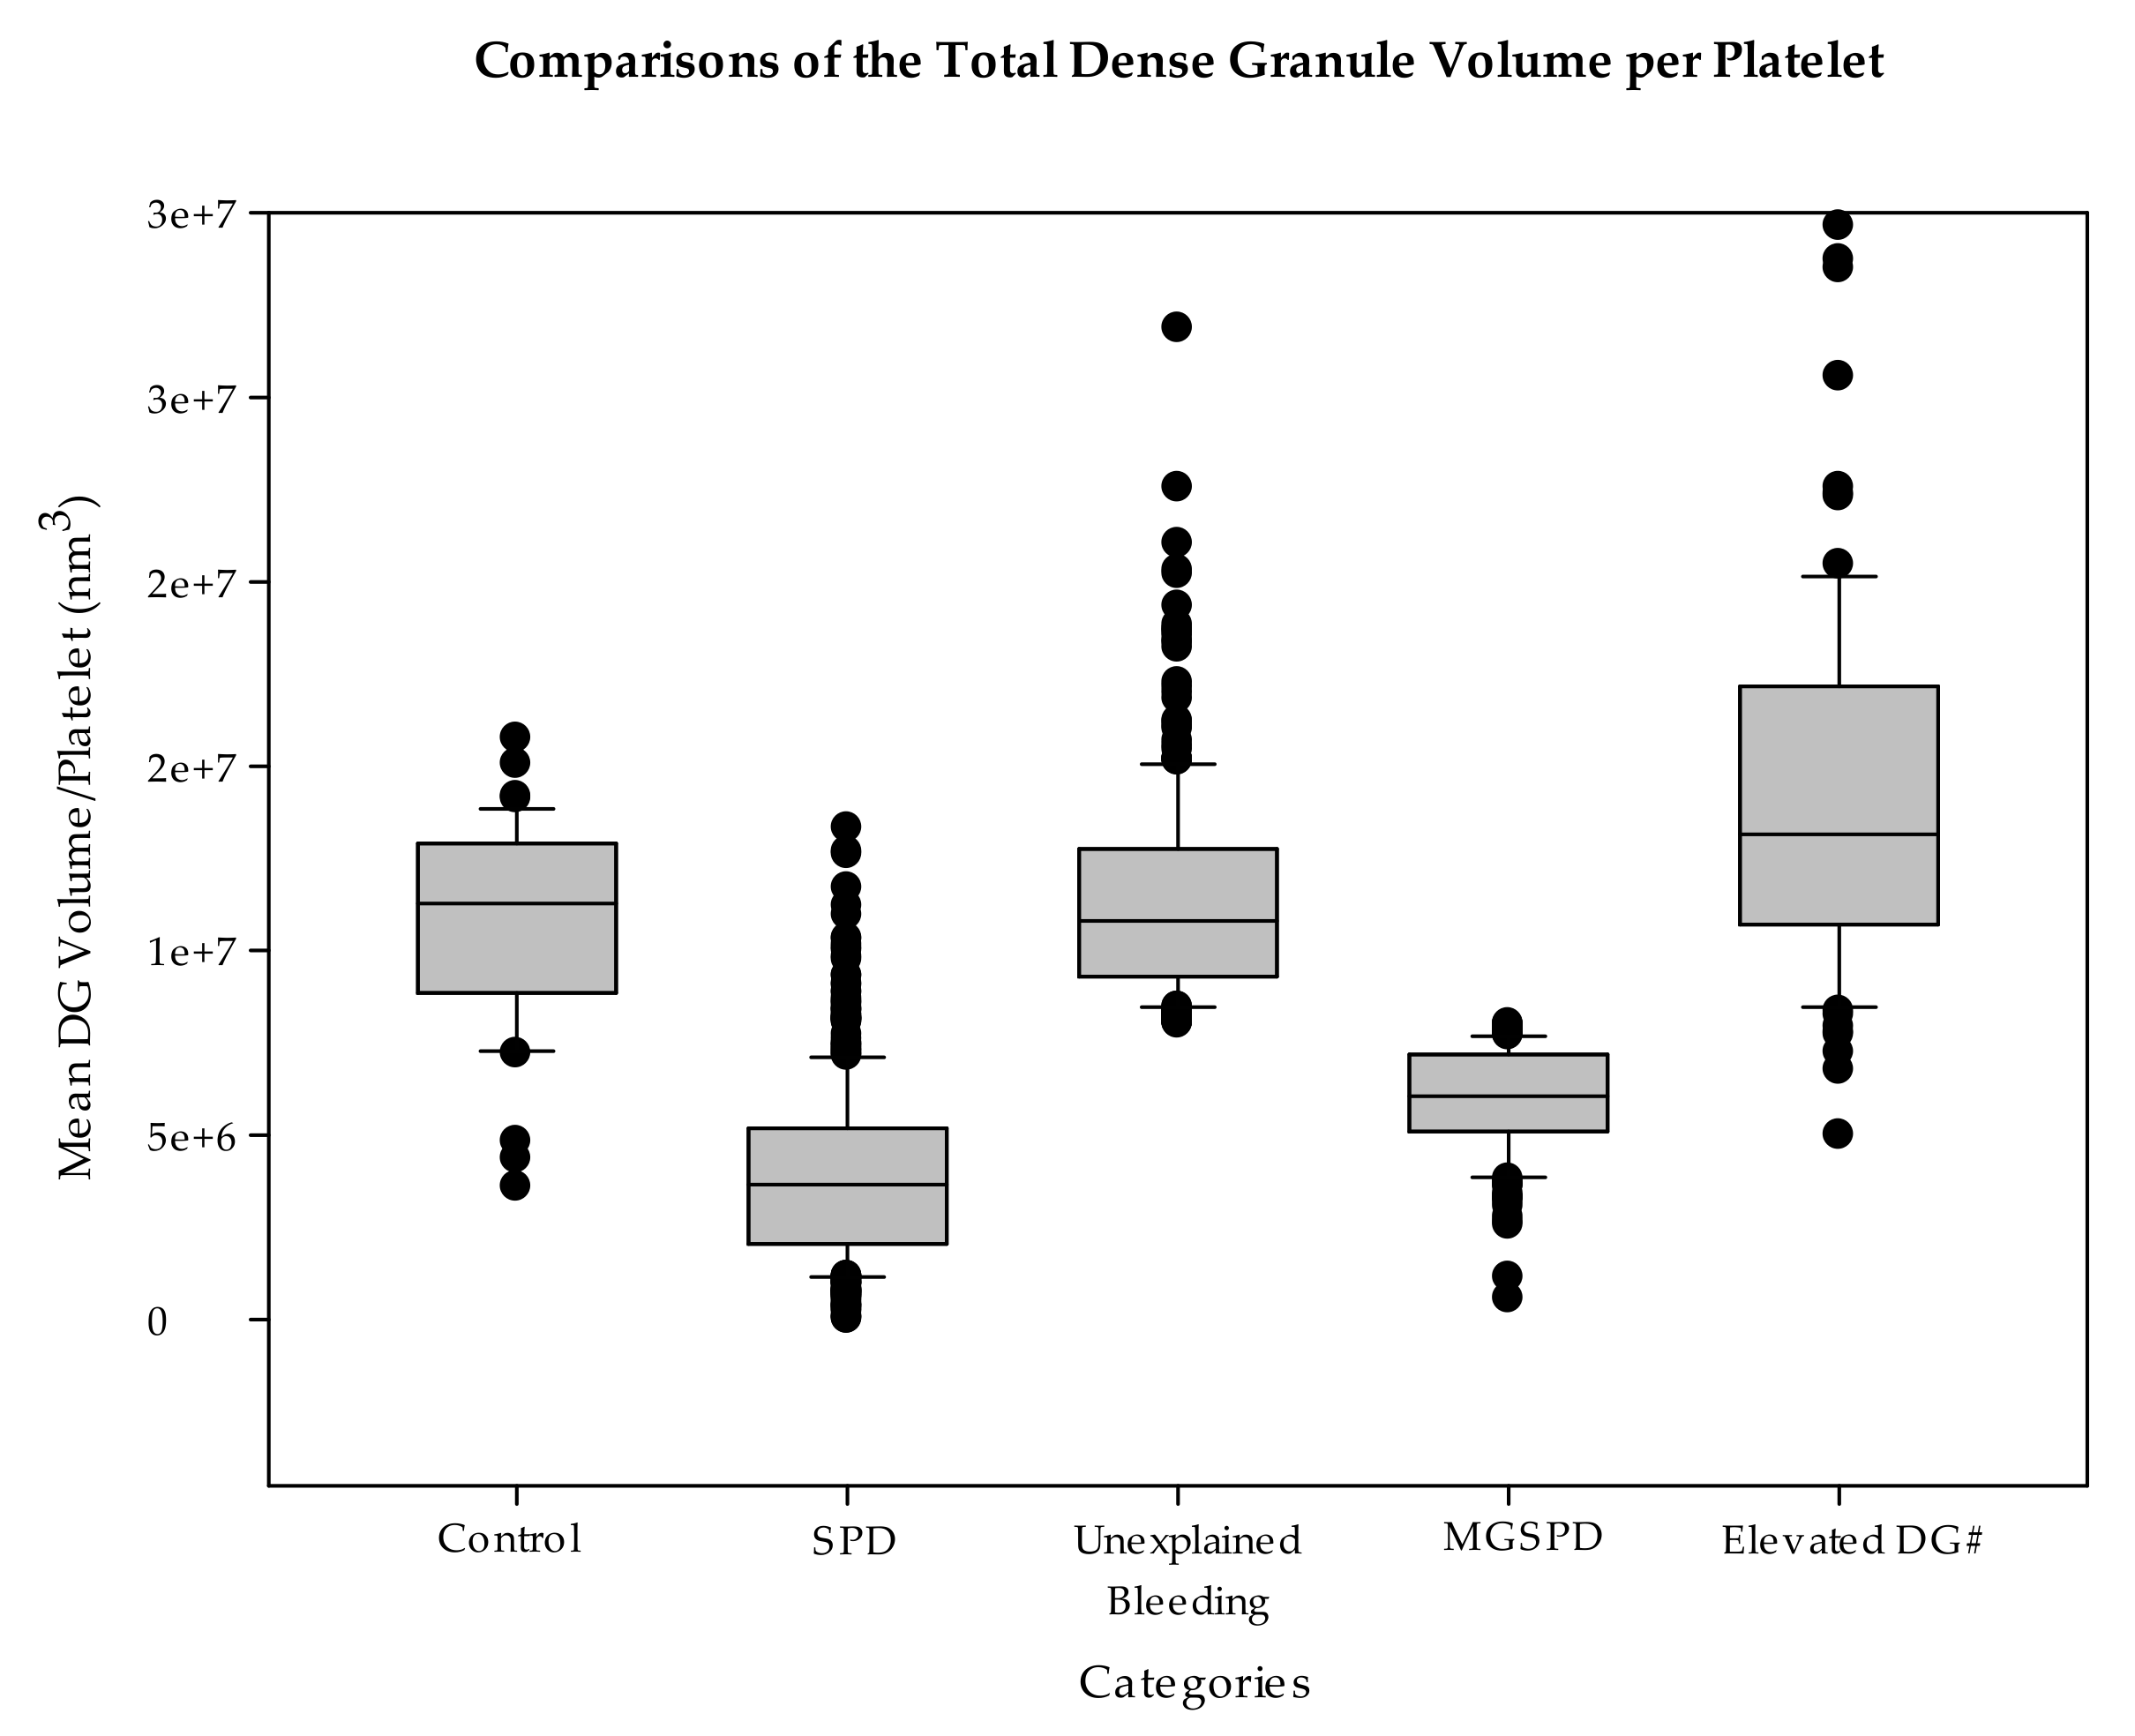 JCM | Free Full-Text | A Morphometric Analysis of Platelet Dense Granules  of Patients with Unexplained Bleeding: A New Entity of Delta-Microgranular  Storage Pool Deficiency | HTML